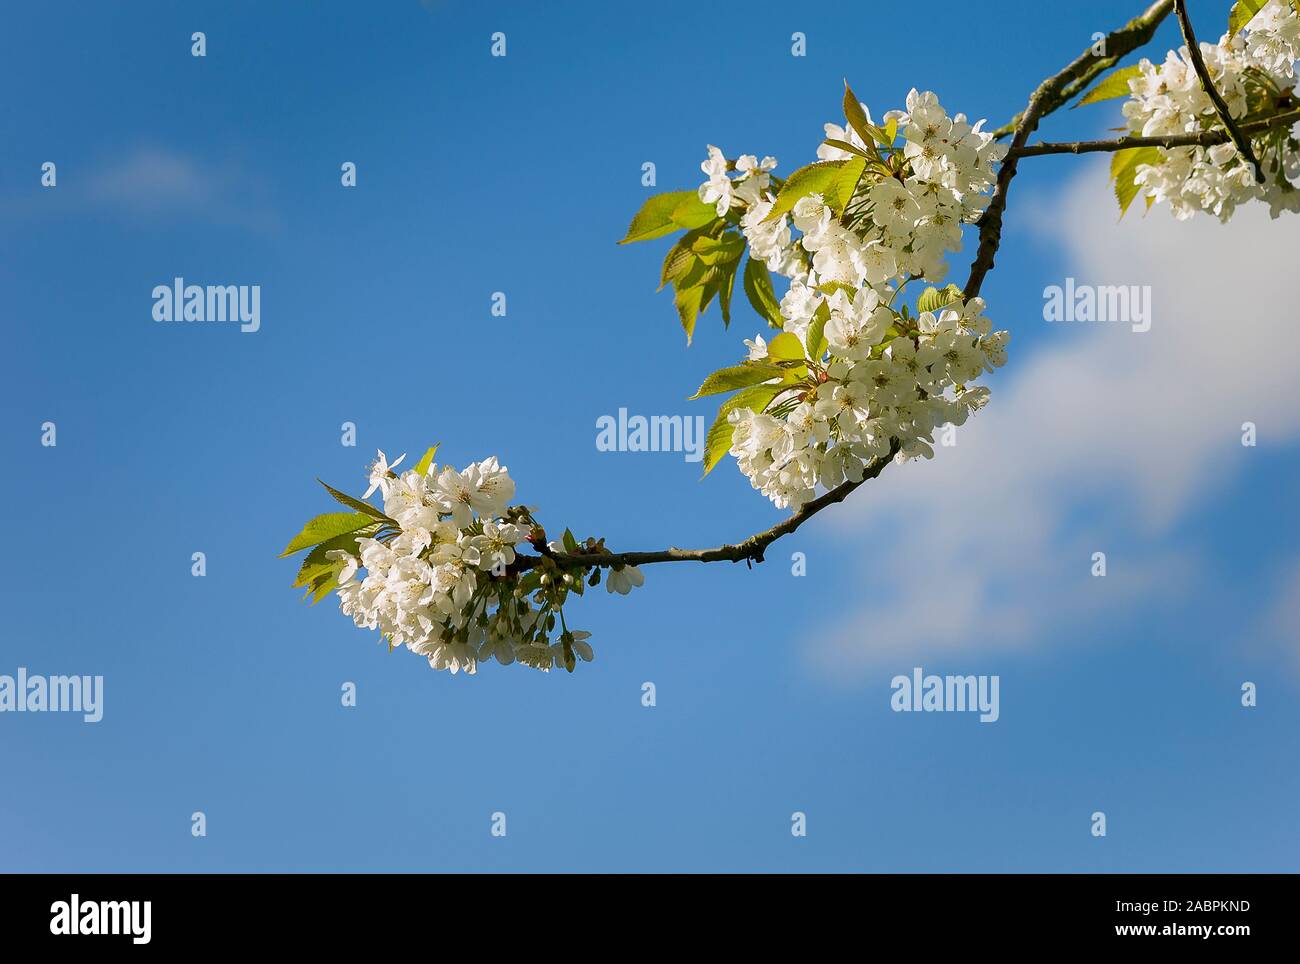 Bunches of white blossom on a wild cherry tree in an English garden in April Stock Photo